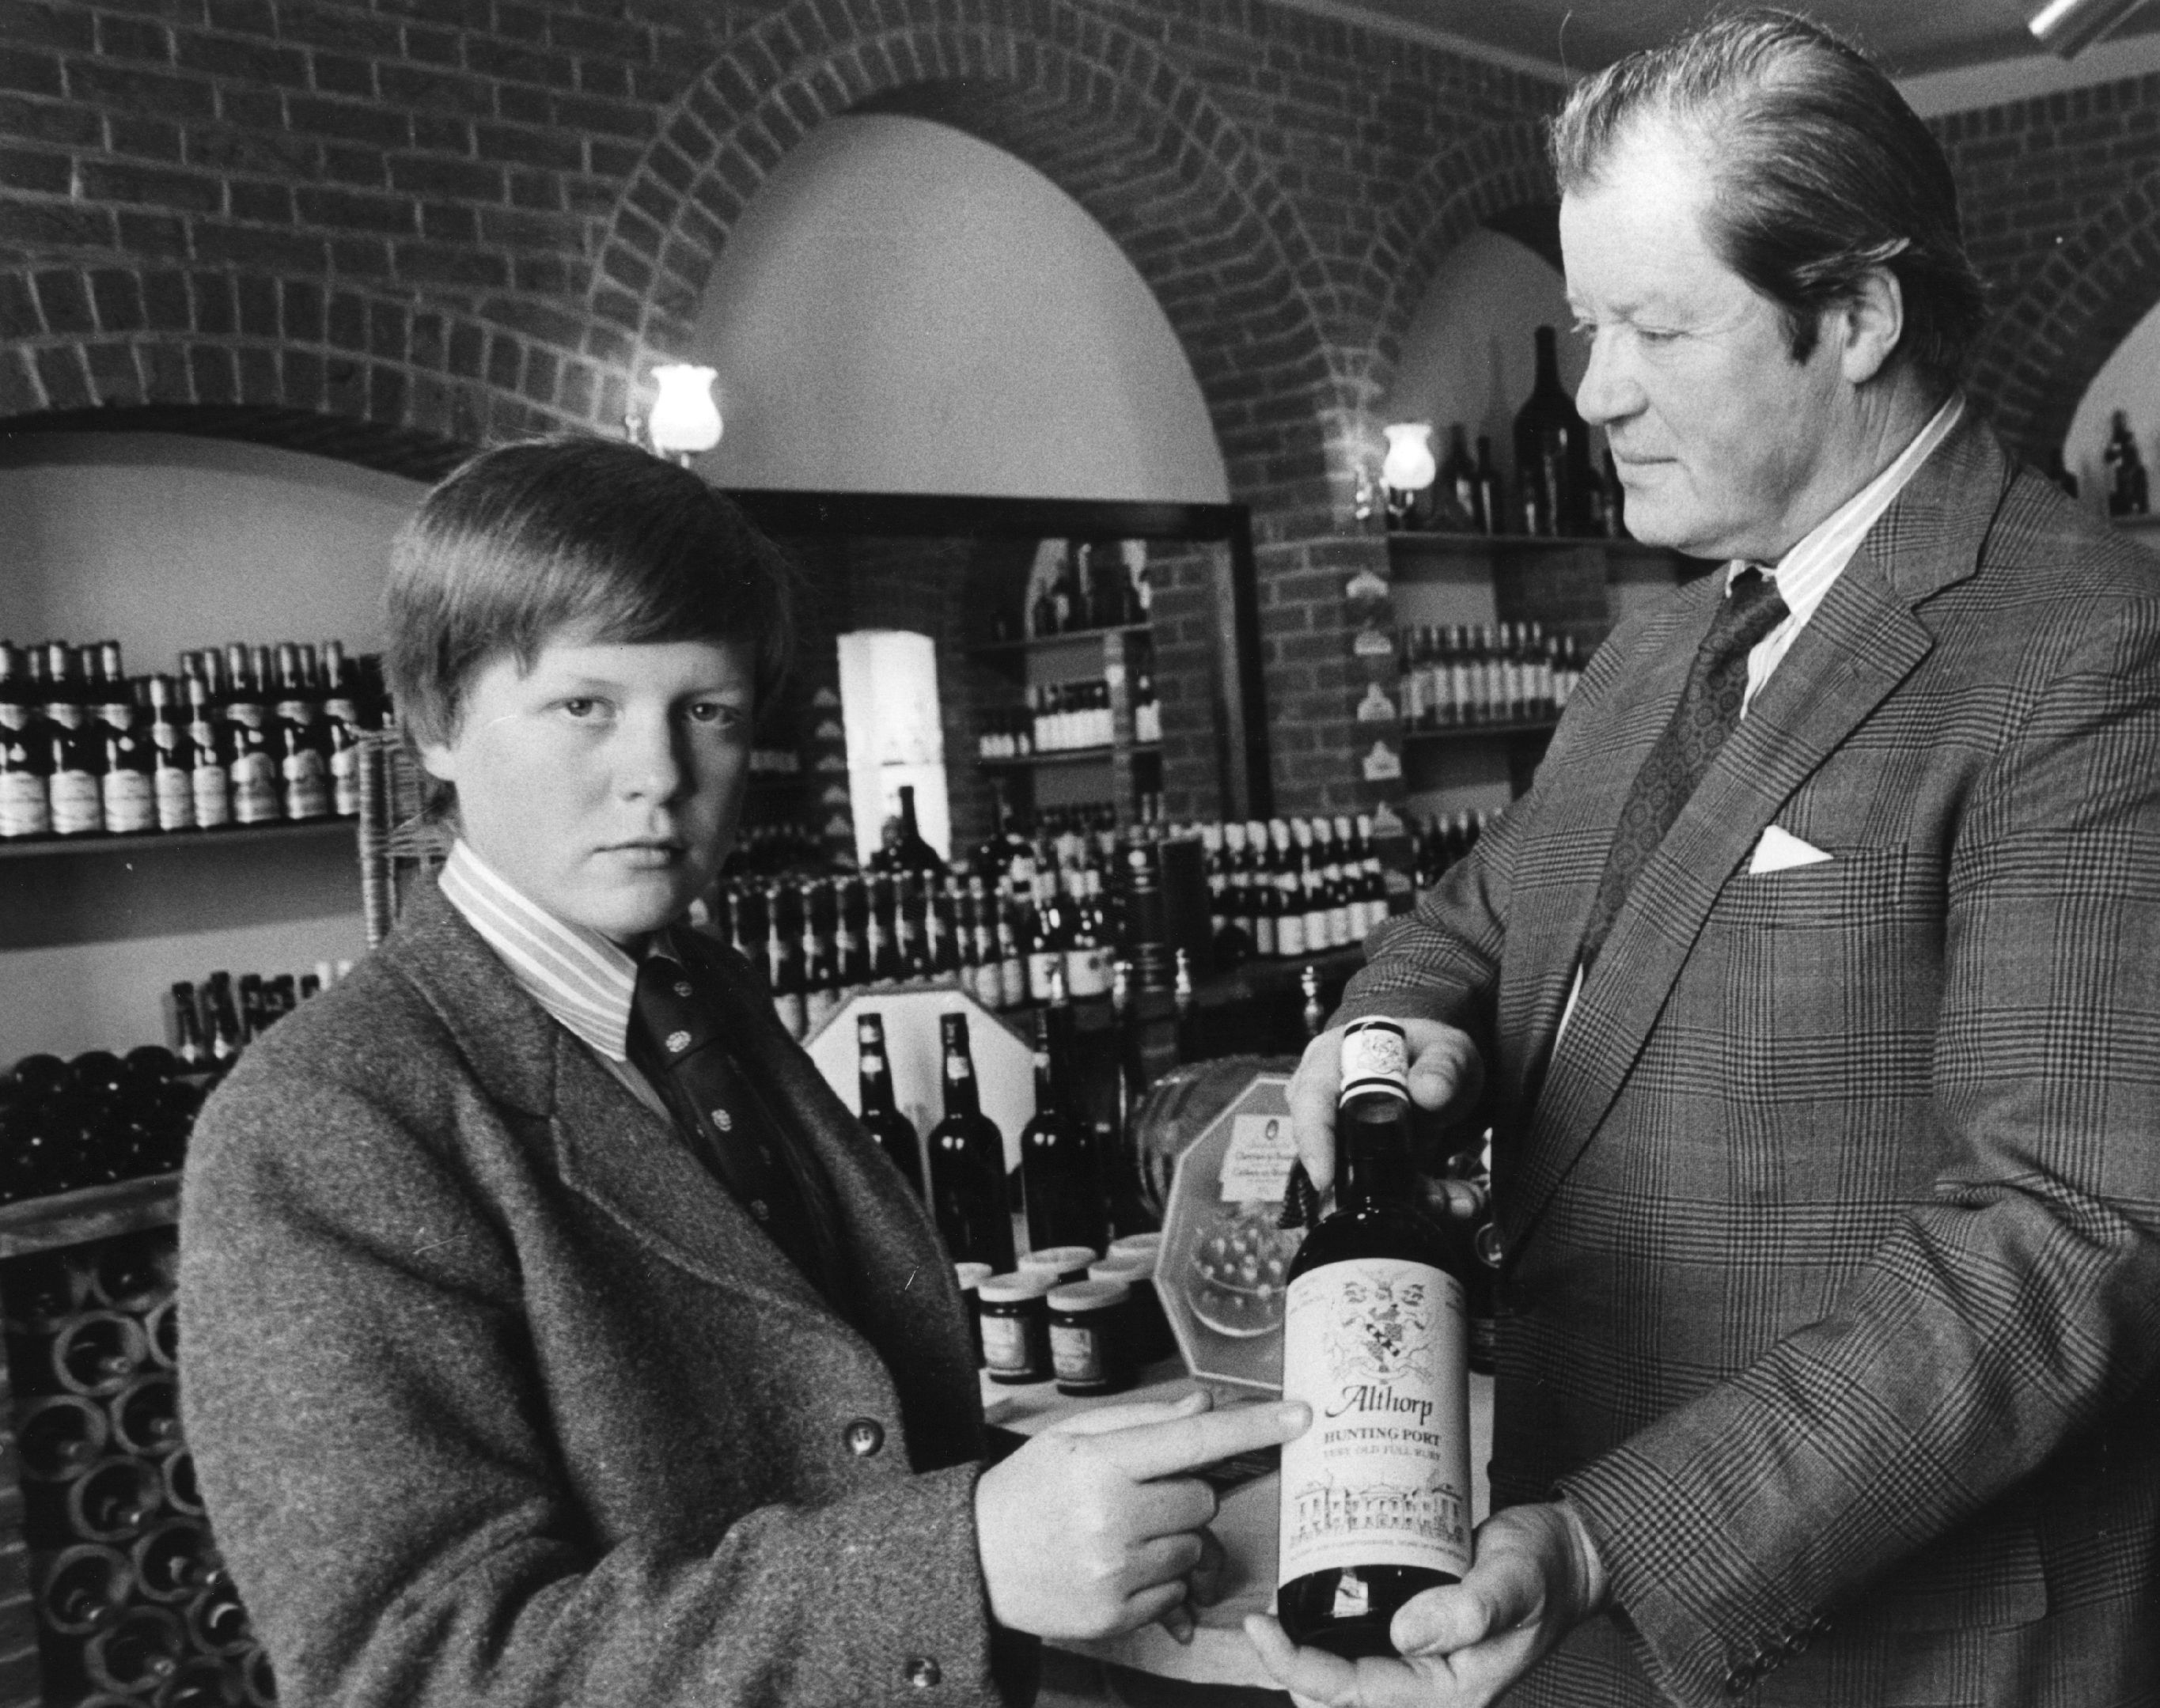 Charles Spencer, Viscount Althorp with his father the 8th Earl Spencer in their cellar at Althorp House in on September 9, 1977 in Northamptonshire. / Source: Getty Images